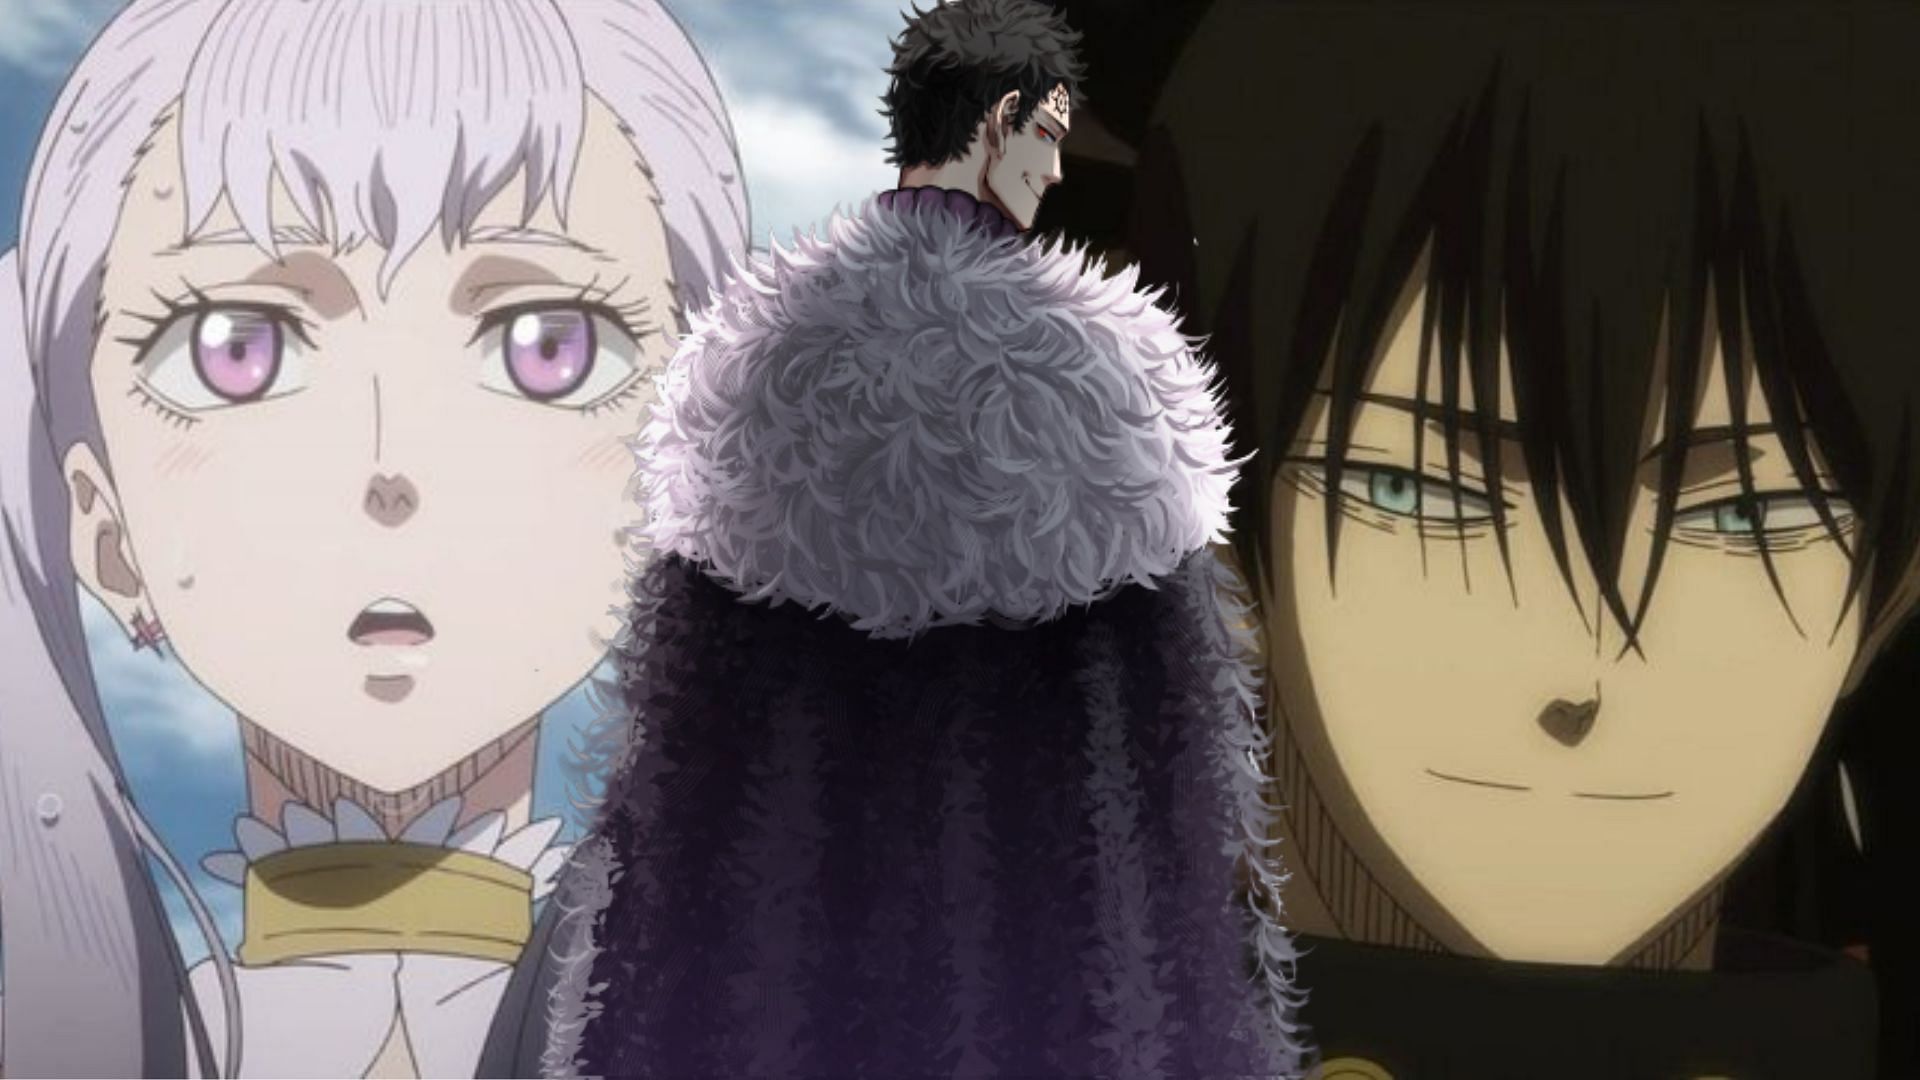 Noelle, Lucius, and Nacht as seen in Black Clover